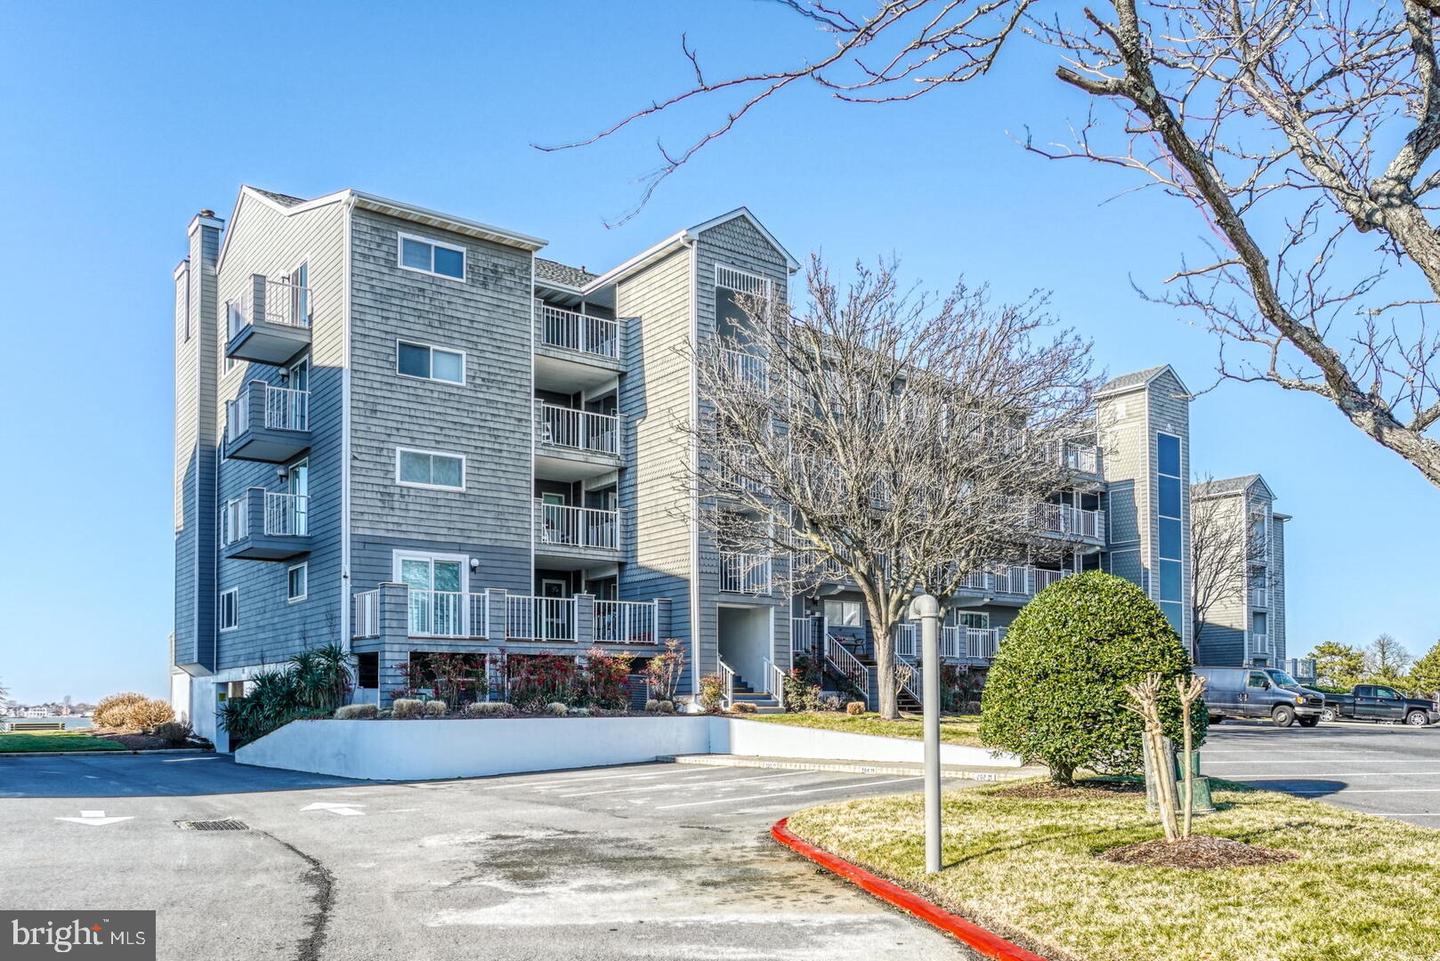 MDWO2018684-802839133380-2024-01-30-15-23-54 427 14th St #401 M | Ocean City, MD Real Estate For Sale | MLS# Mdwo2018684  - 1st Choice Properties